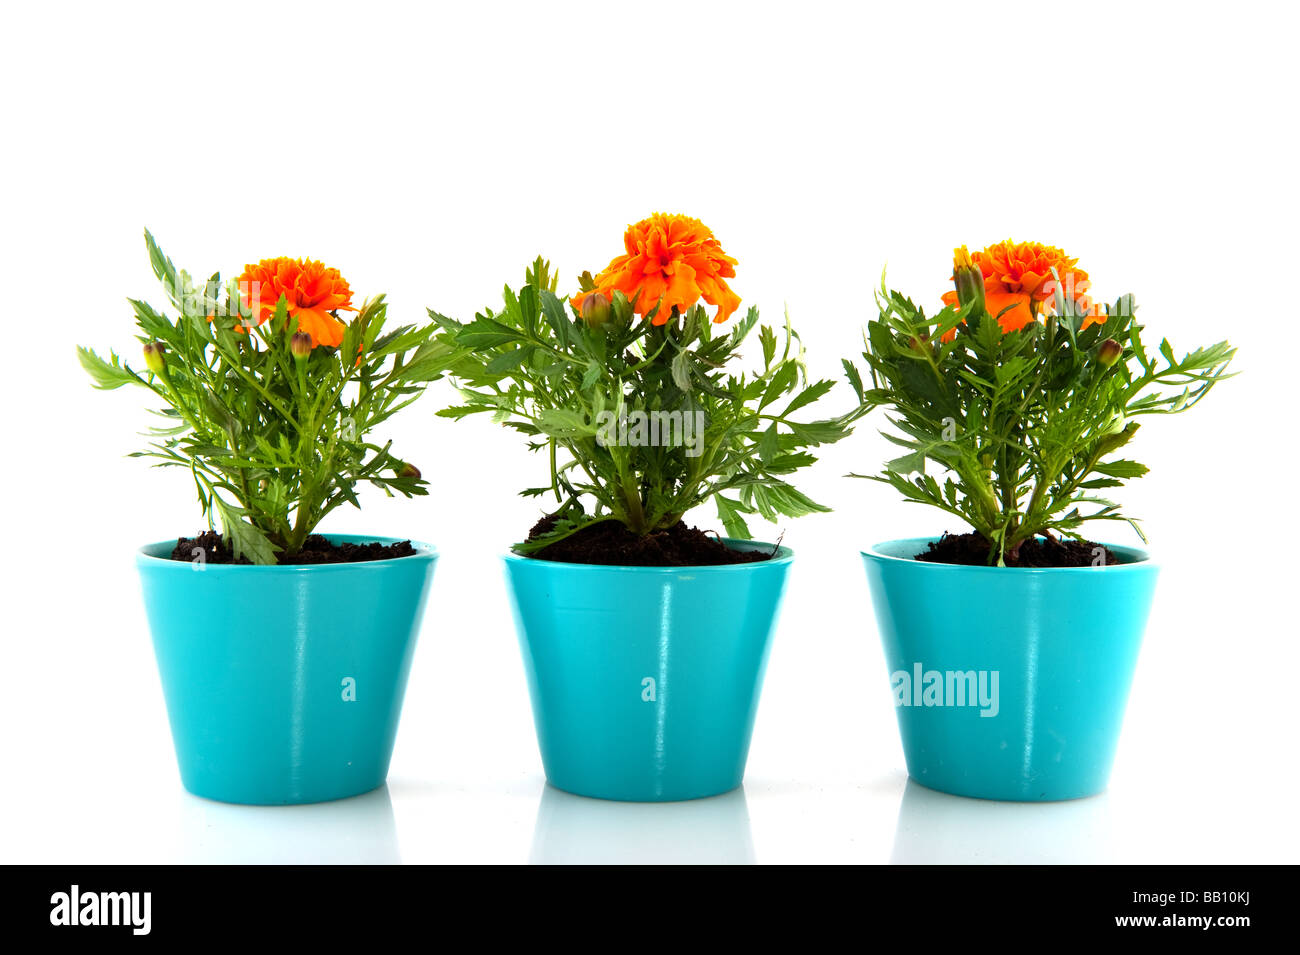 French marigolds in blue flower pots Stock Photo